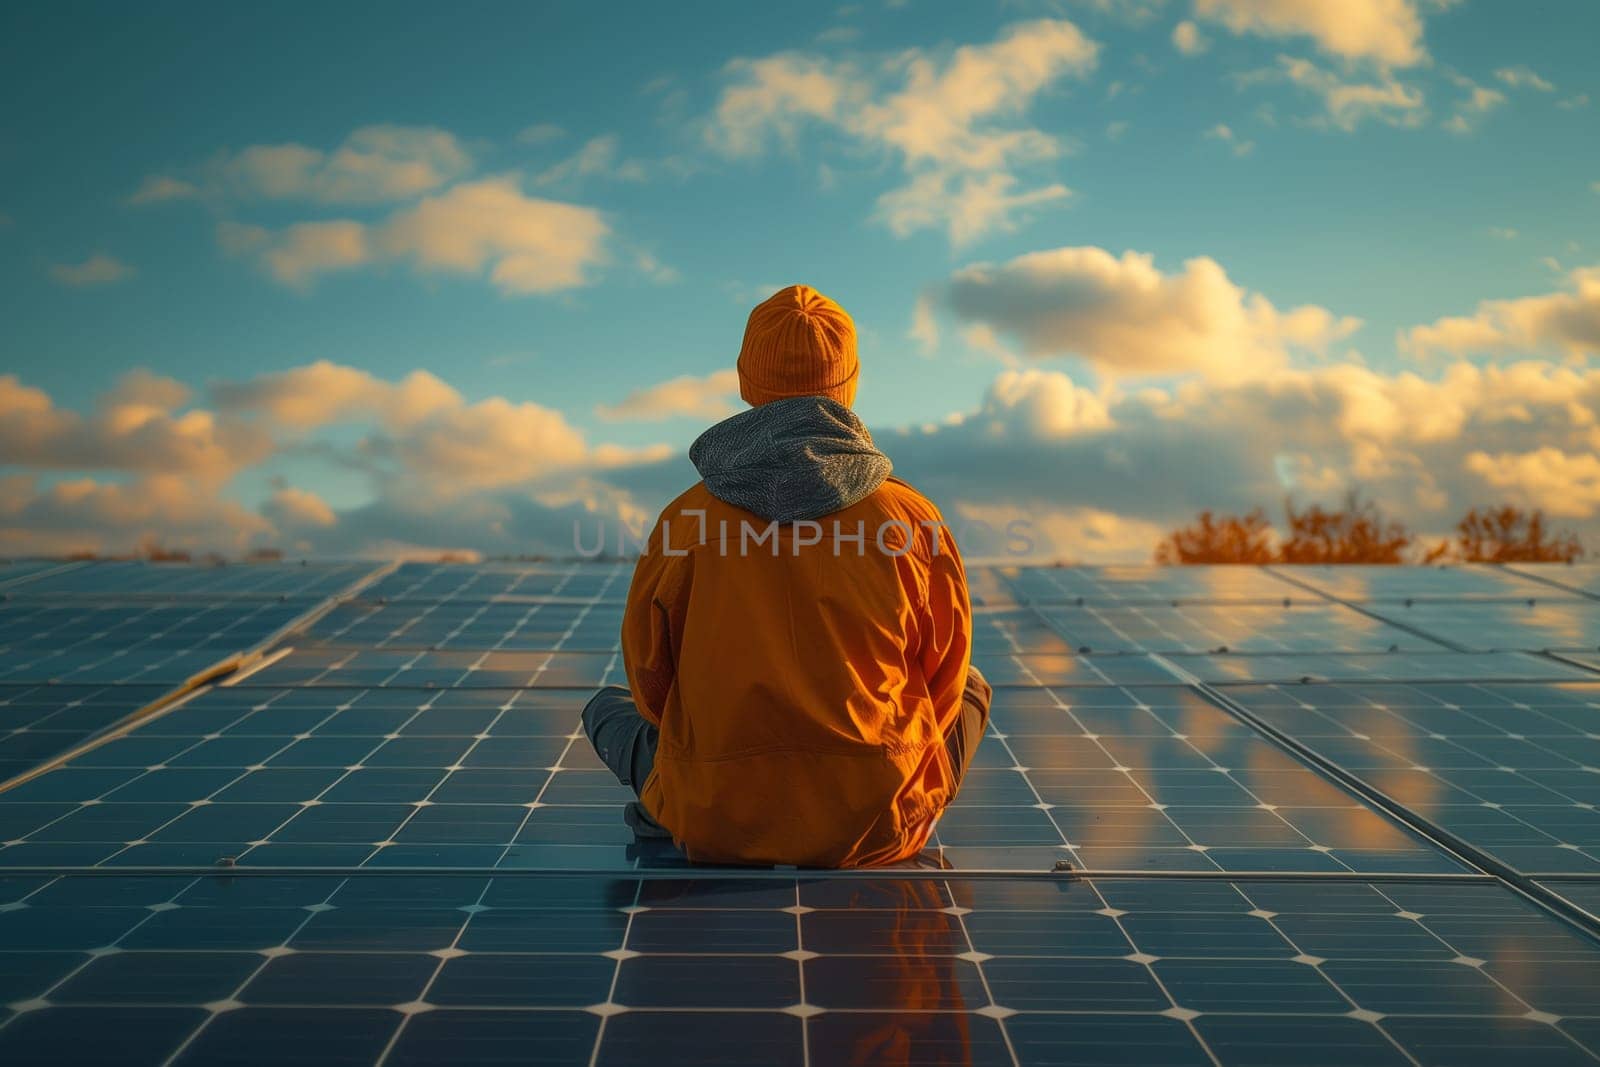 a man is sitting on top of a solar panel looking at the sky by richwolf